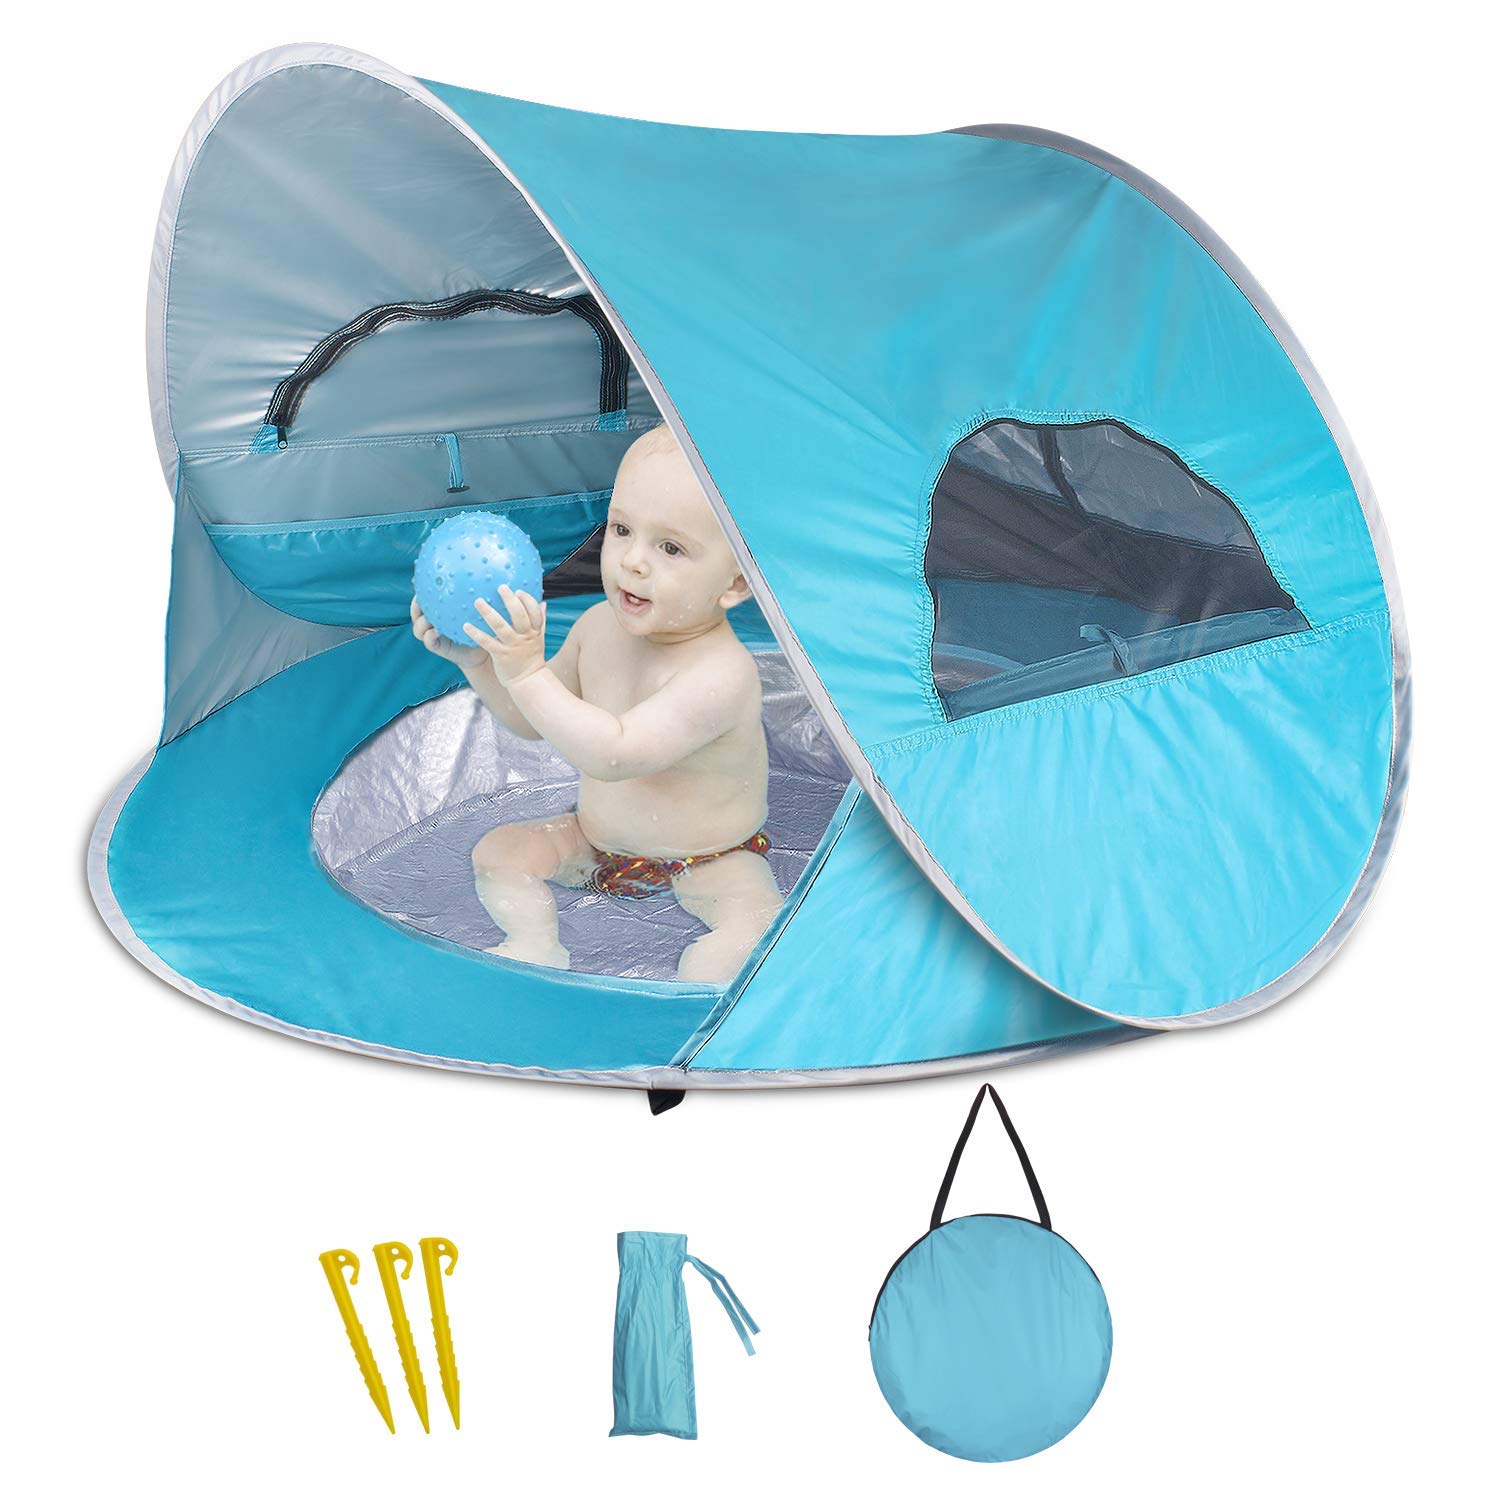 AIOIAI Baby Beach Tent with Built-in Pool, Infant Pop Up Tent with 2 Mesh Side Windows, 2 Side Pockets, UPF 50+ Sun Shade Shelter with Rear Zipper Panel for Aged 0-3, Fits 1-2 Children 